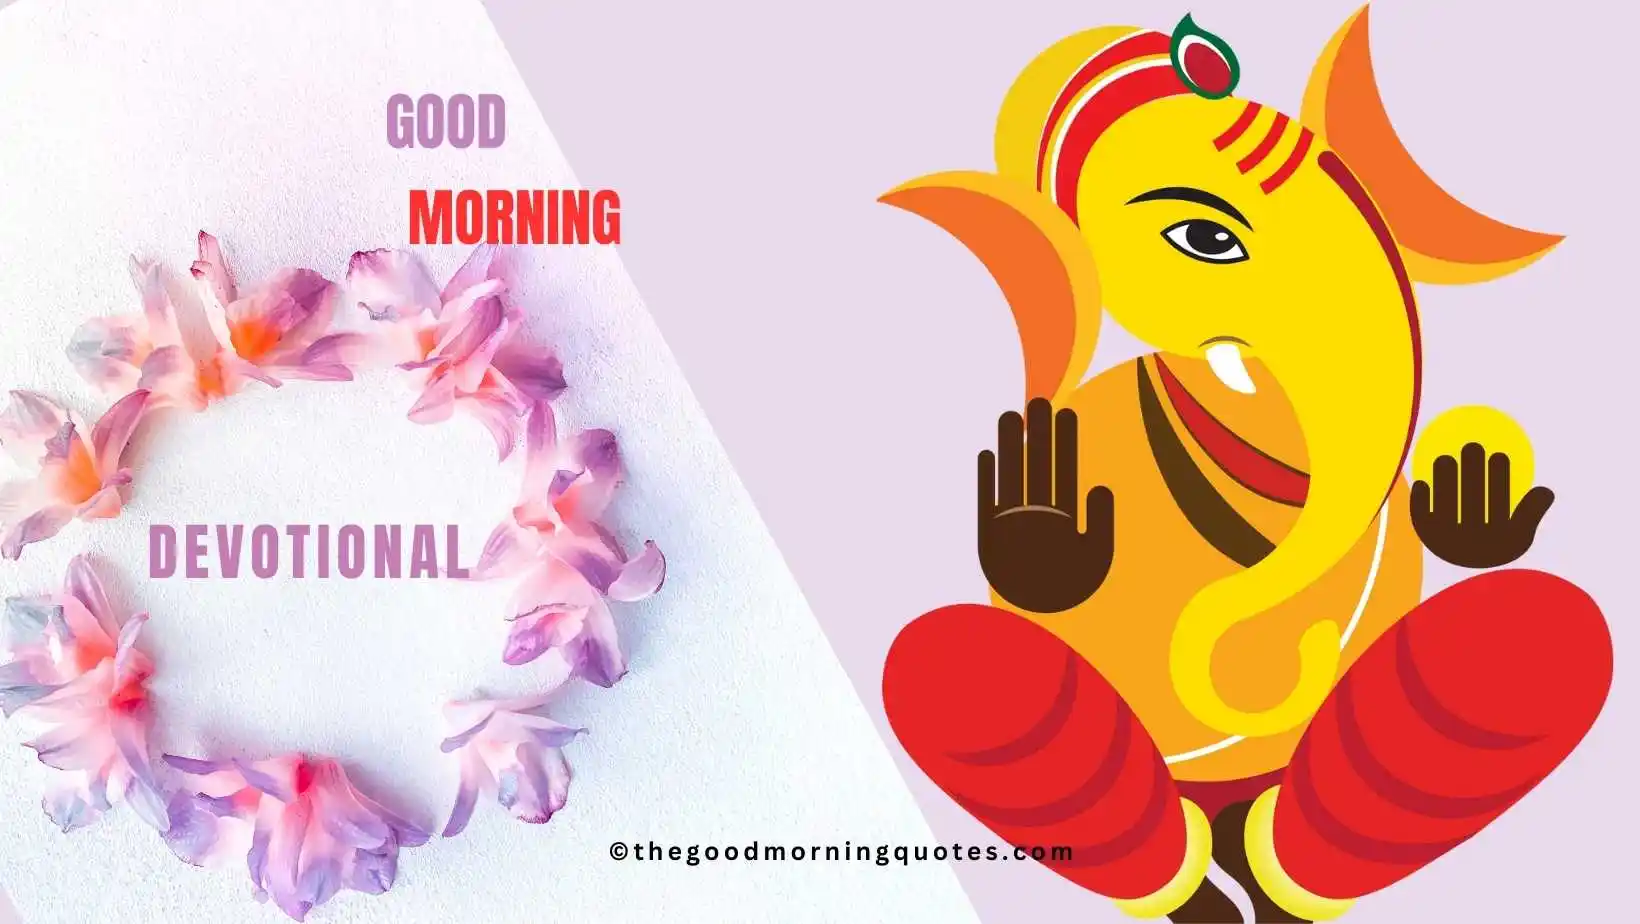 Devotional Good Morning Quotes in Hindi